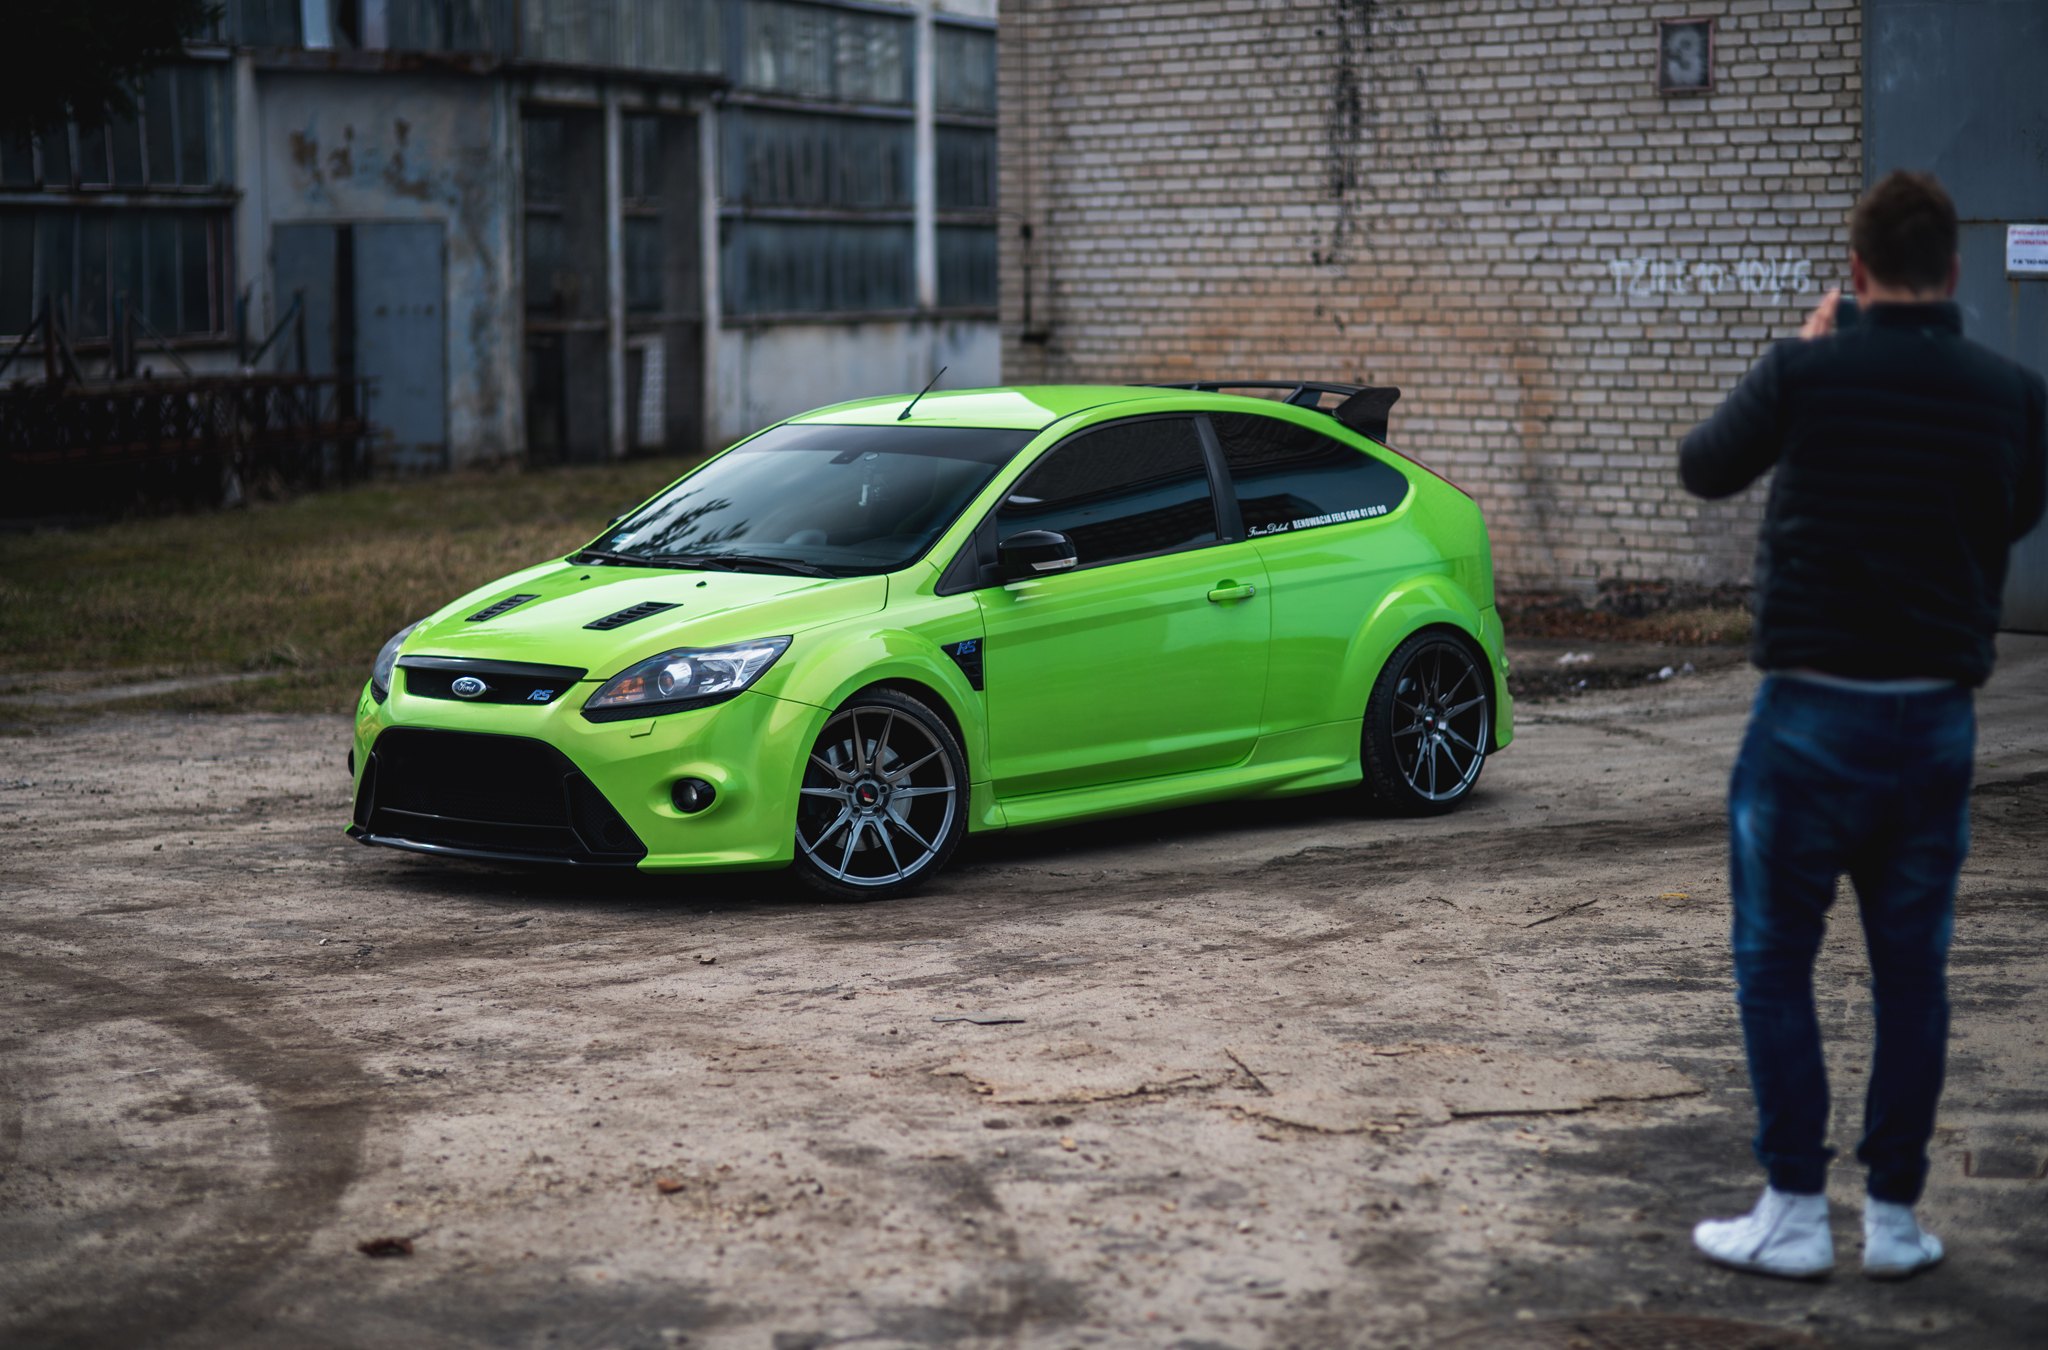 Charcoal Gray JR Wheels on Green Ford Focus - Photo by JR Wheels